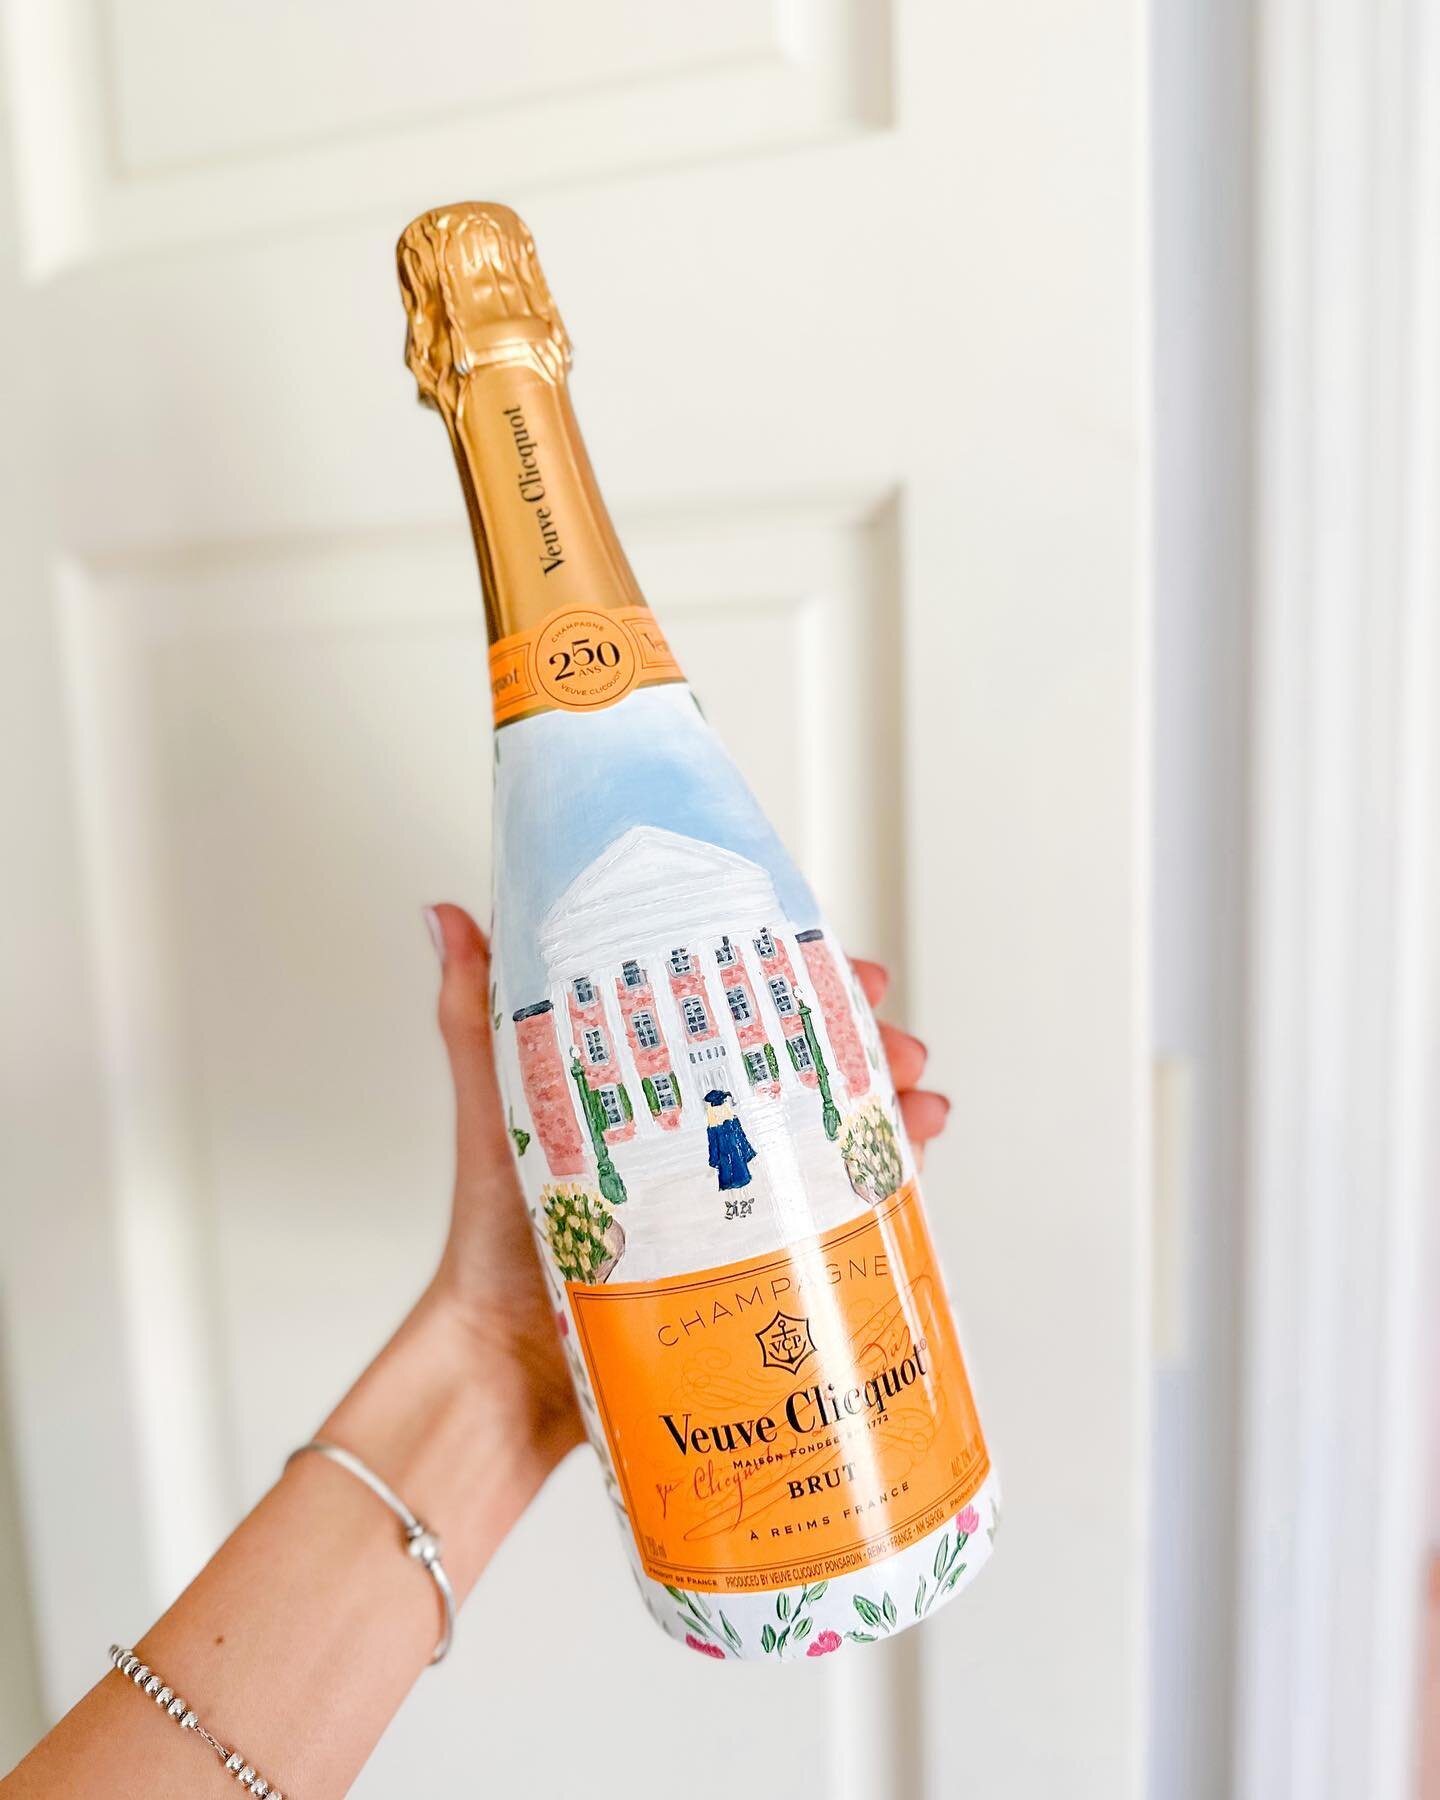 It&rsquo;s a new week and that means new designs and stories! This Ole Miss design was so much fun. 😍

#paintedbottles #paintedchampagnebottle #paintedchampagne #graduationseason #graduation #graduationday #graduationgift #2023grad #wedding #wedding